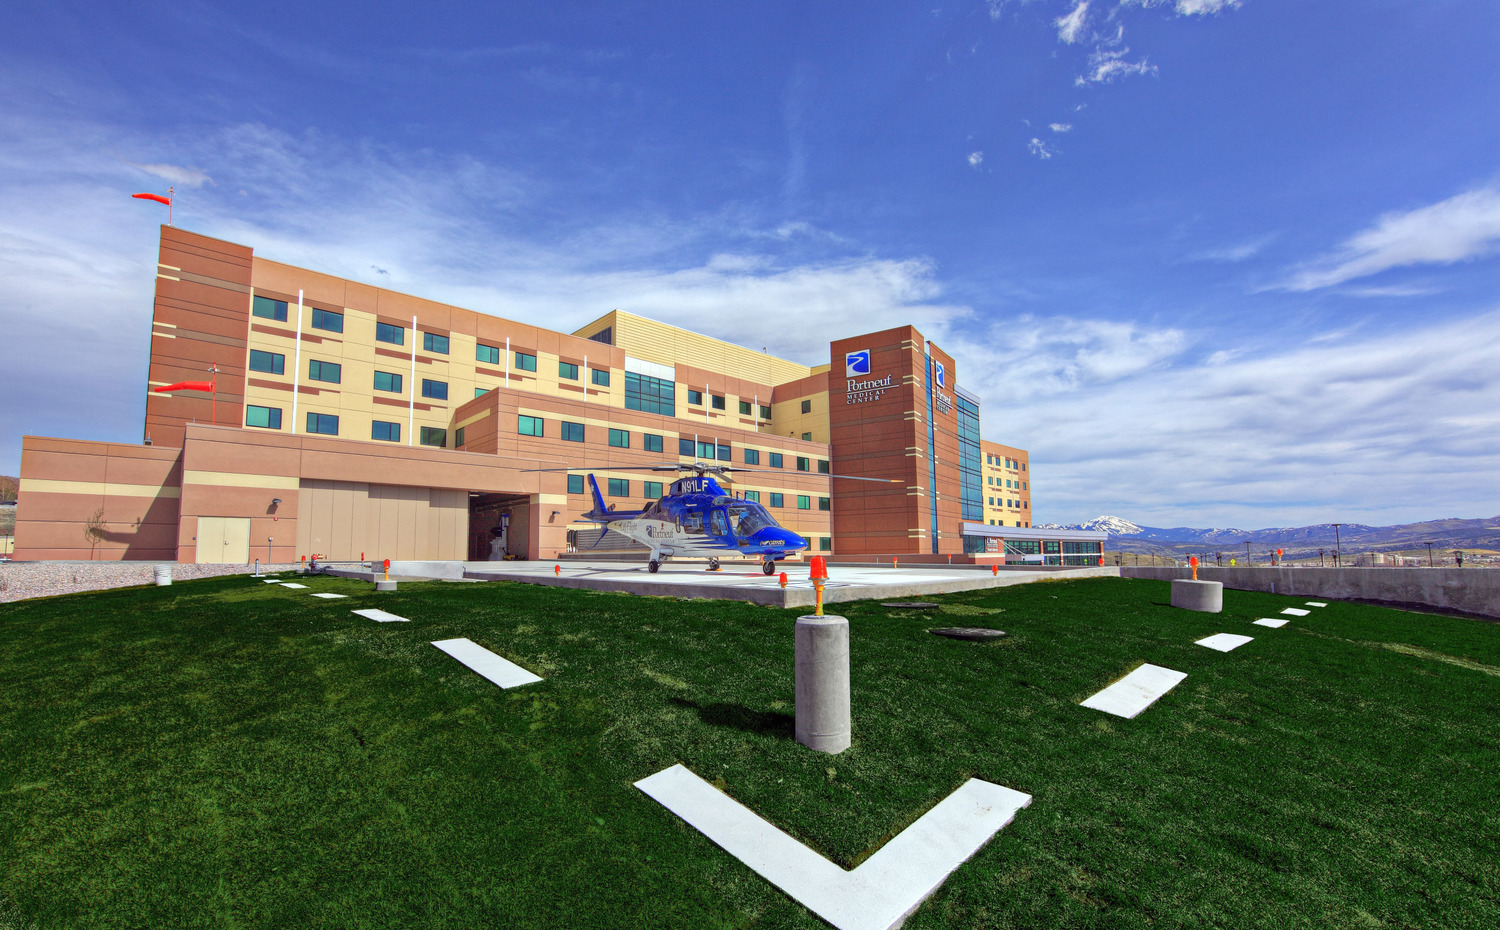 Portneuf Medical Center exterior with green grass and helicopter landing pad